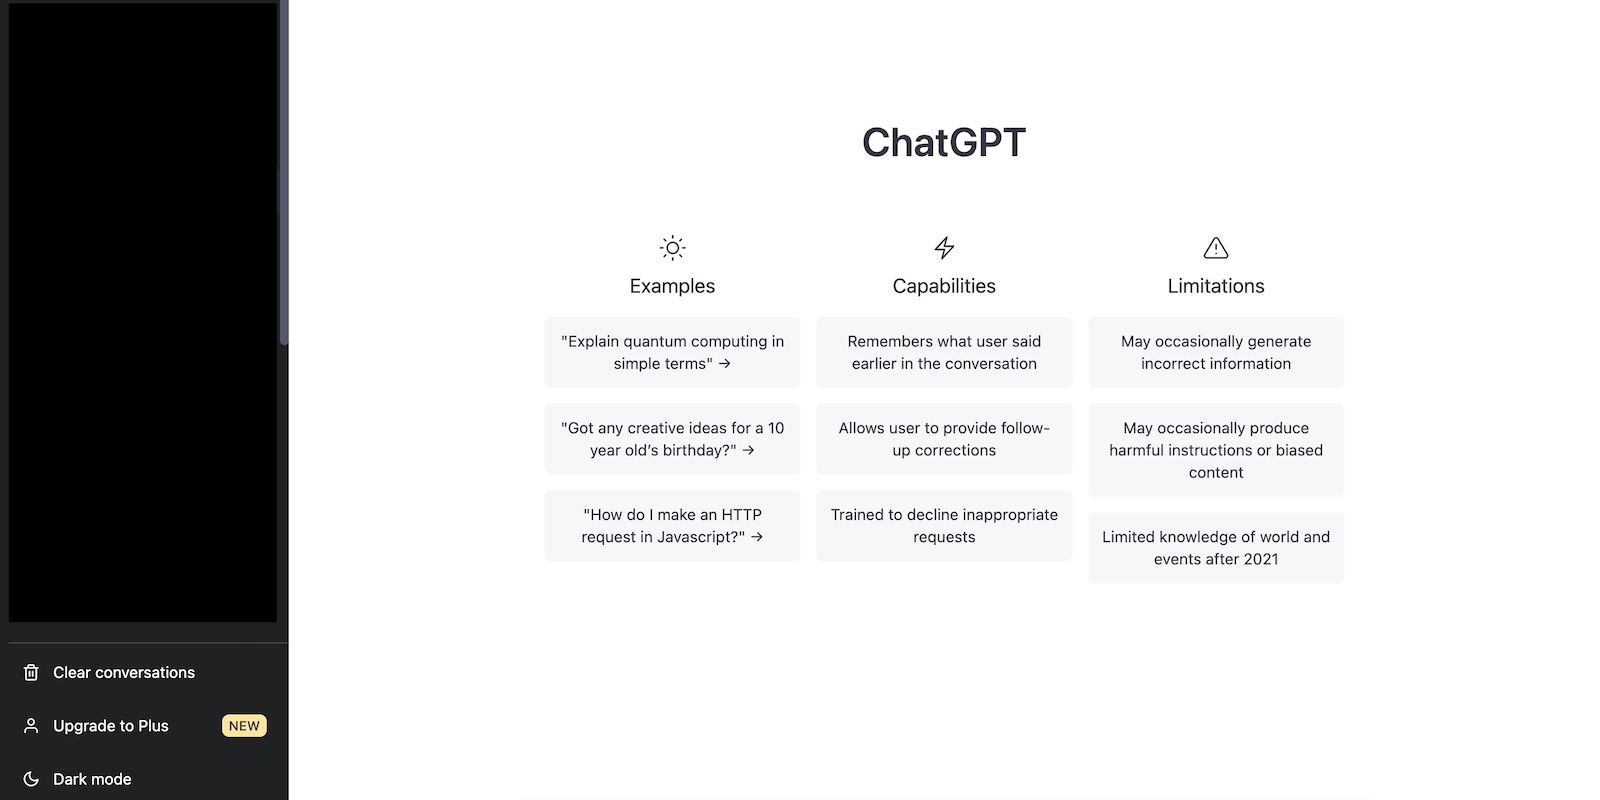 ChatGPT Disclaimers About Its Limitations and Capabilities